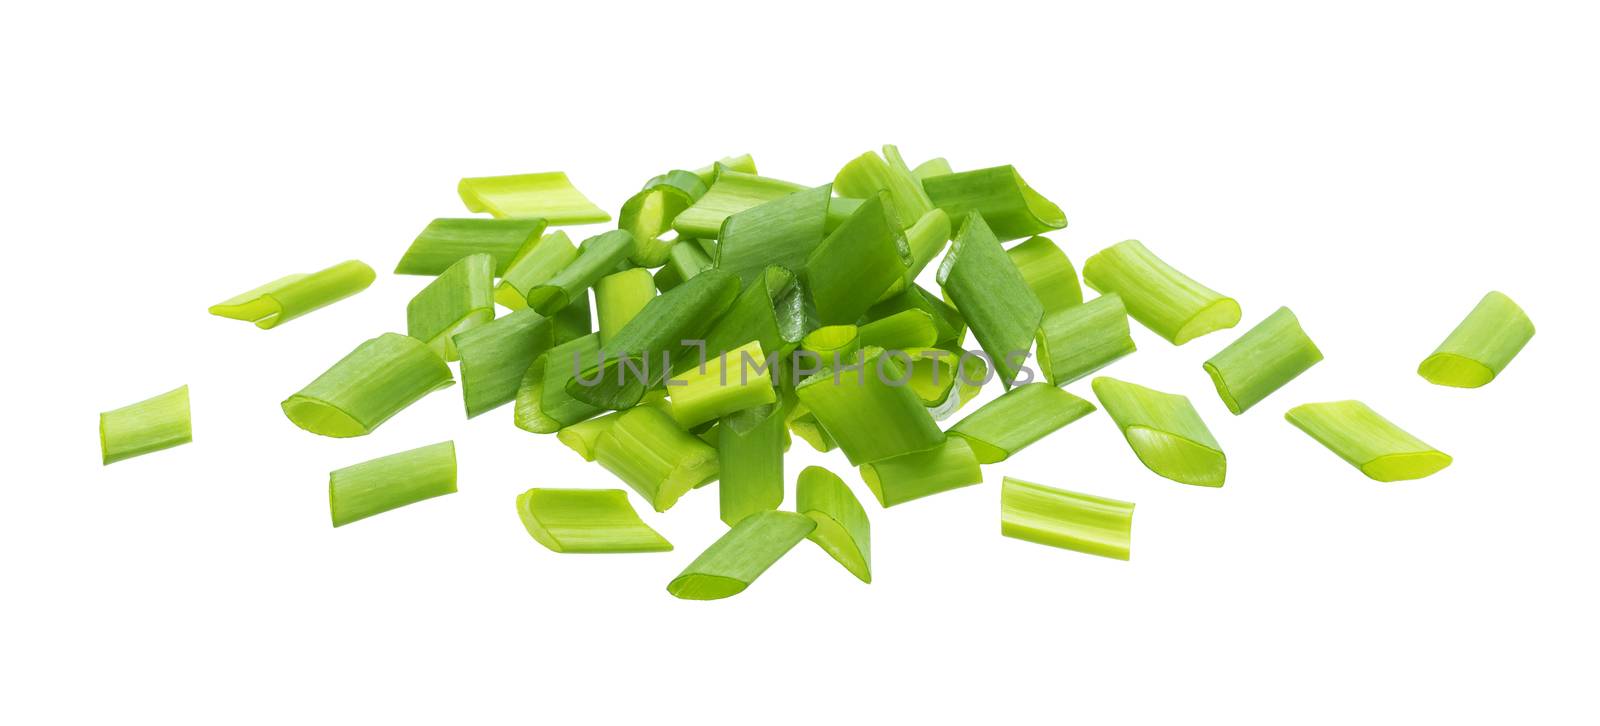 Chopped chives, fresh cut green onions isolated on white background with clipping path